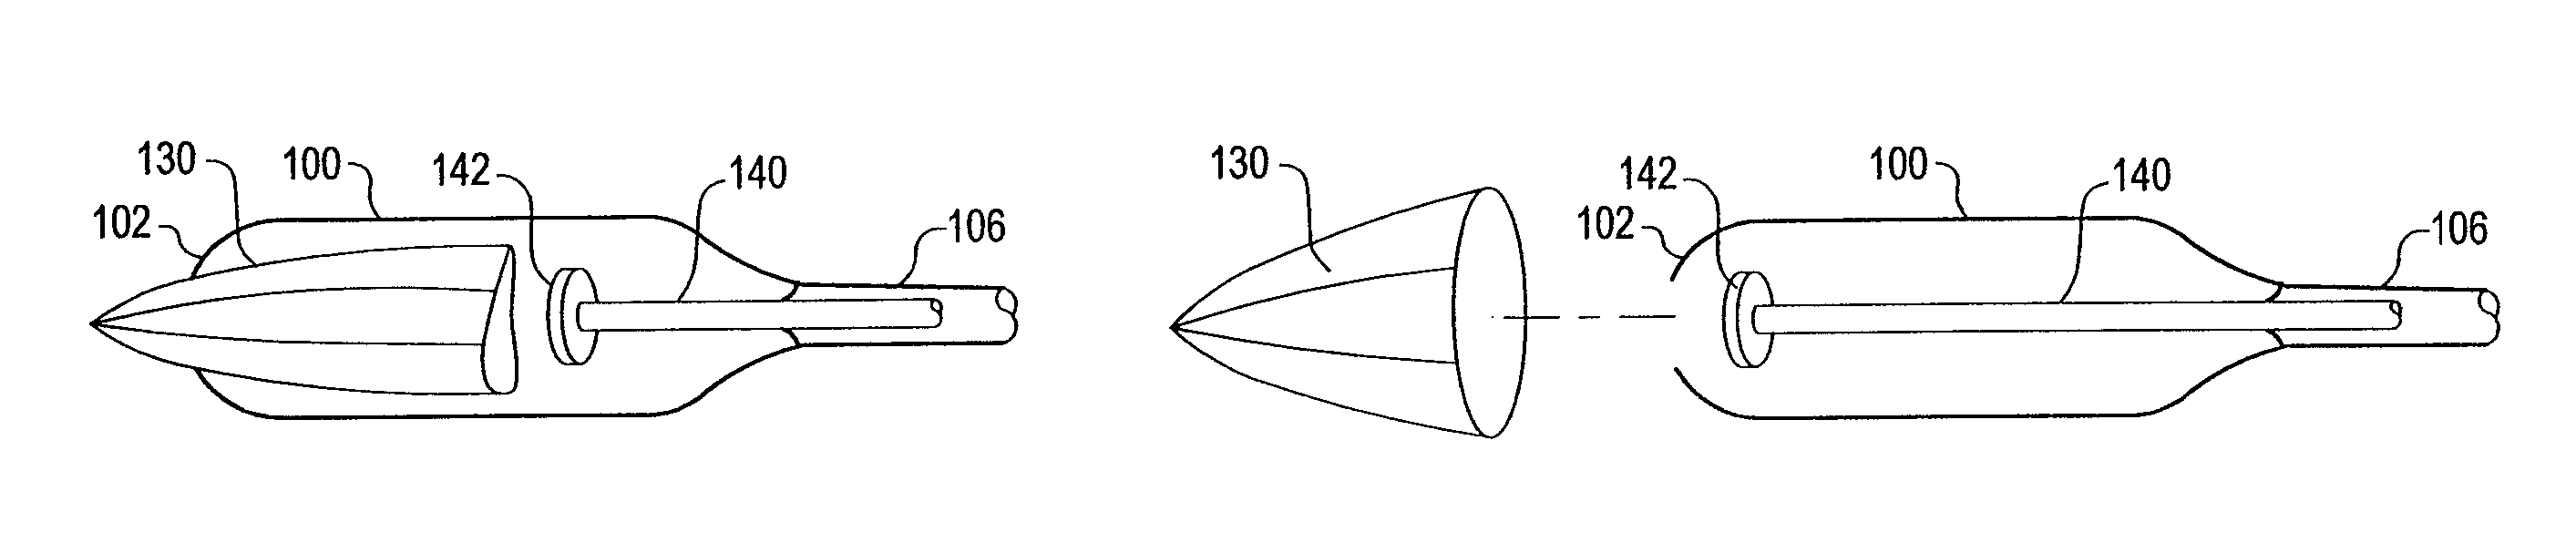 Apparatus and method for deployment of a bronchial obstruction device